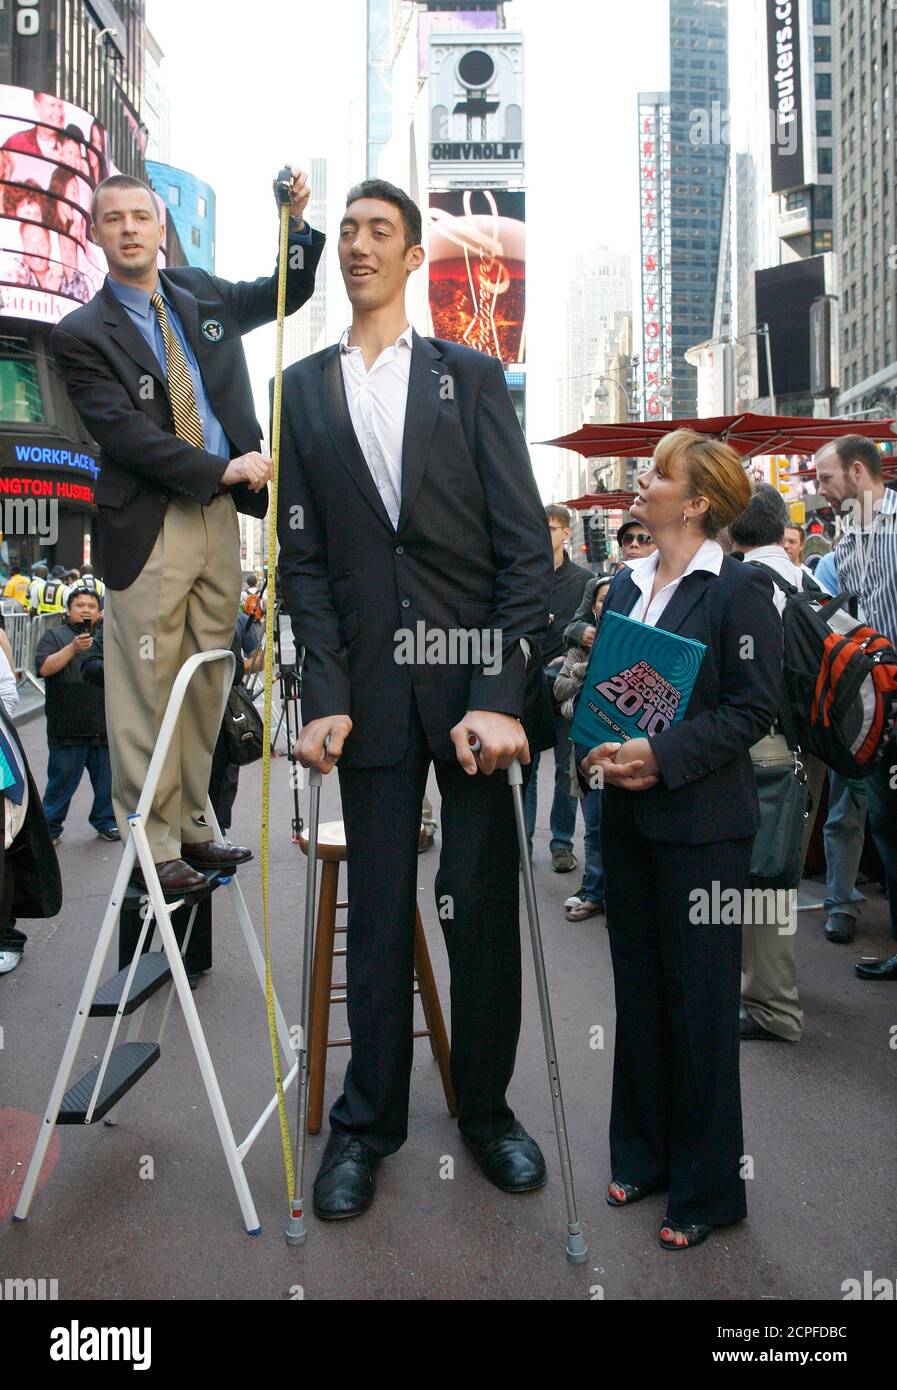 Tallest man in world sultan High Resolution Stock Photography and Images -  Alamy